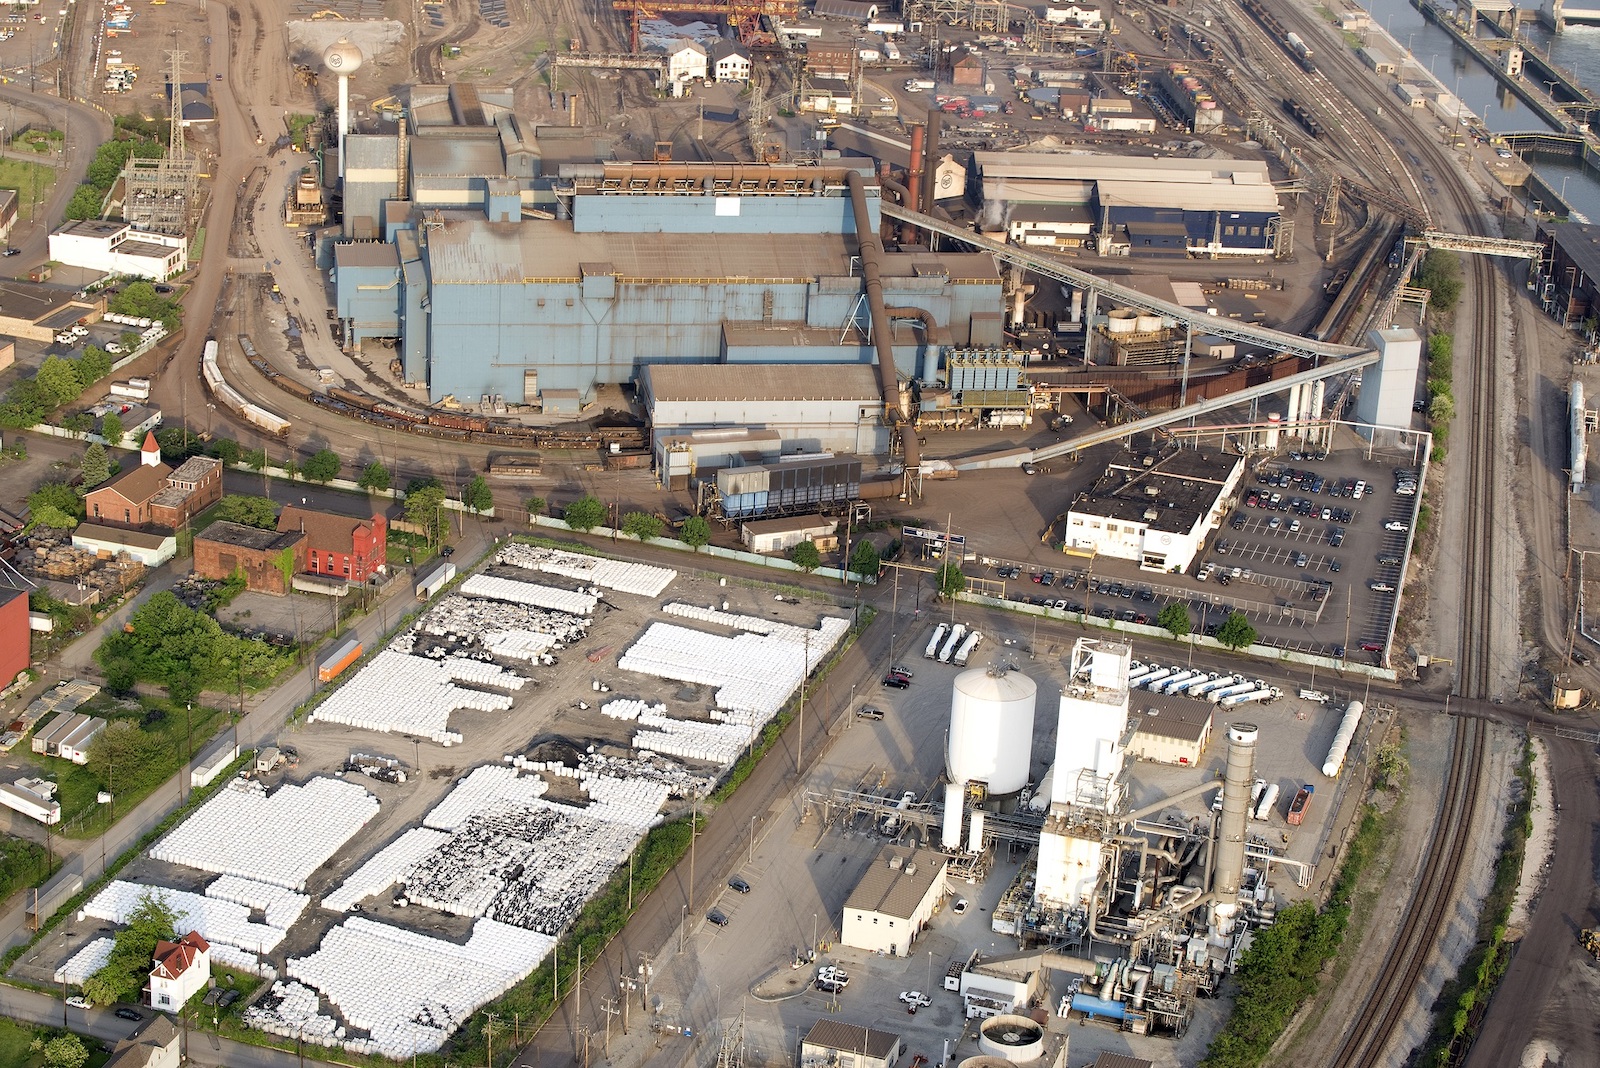 An aerial view of an industrial plant